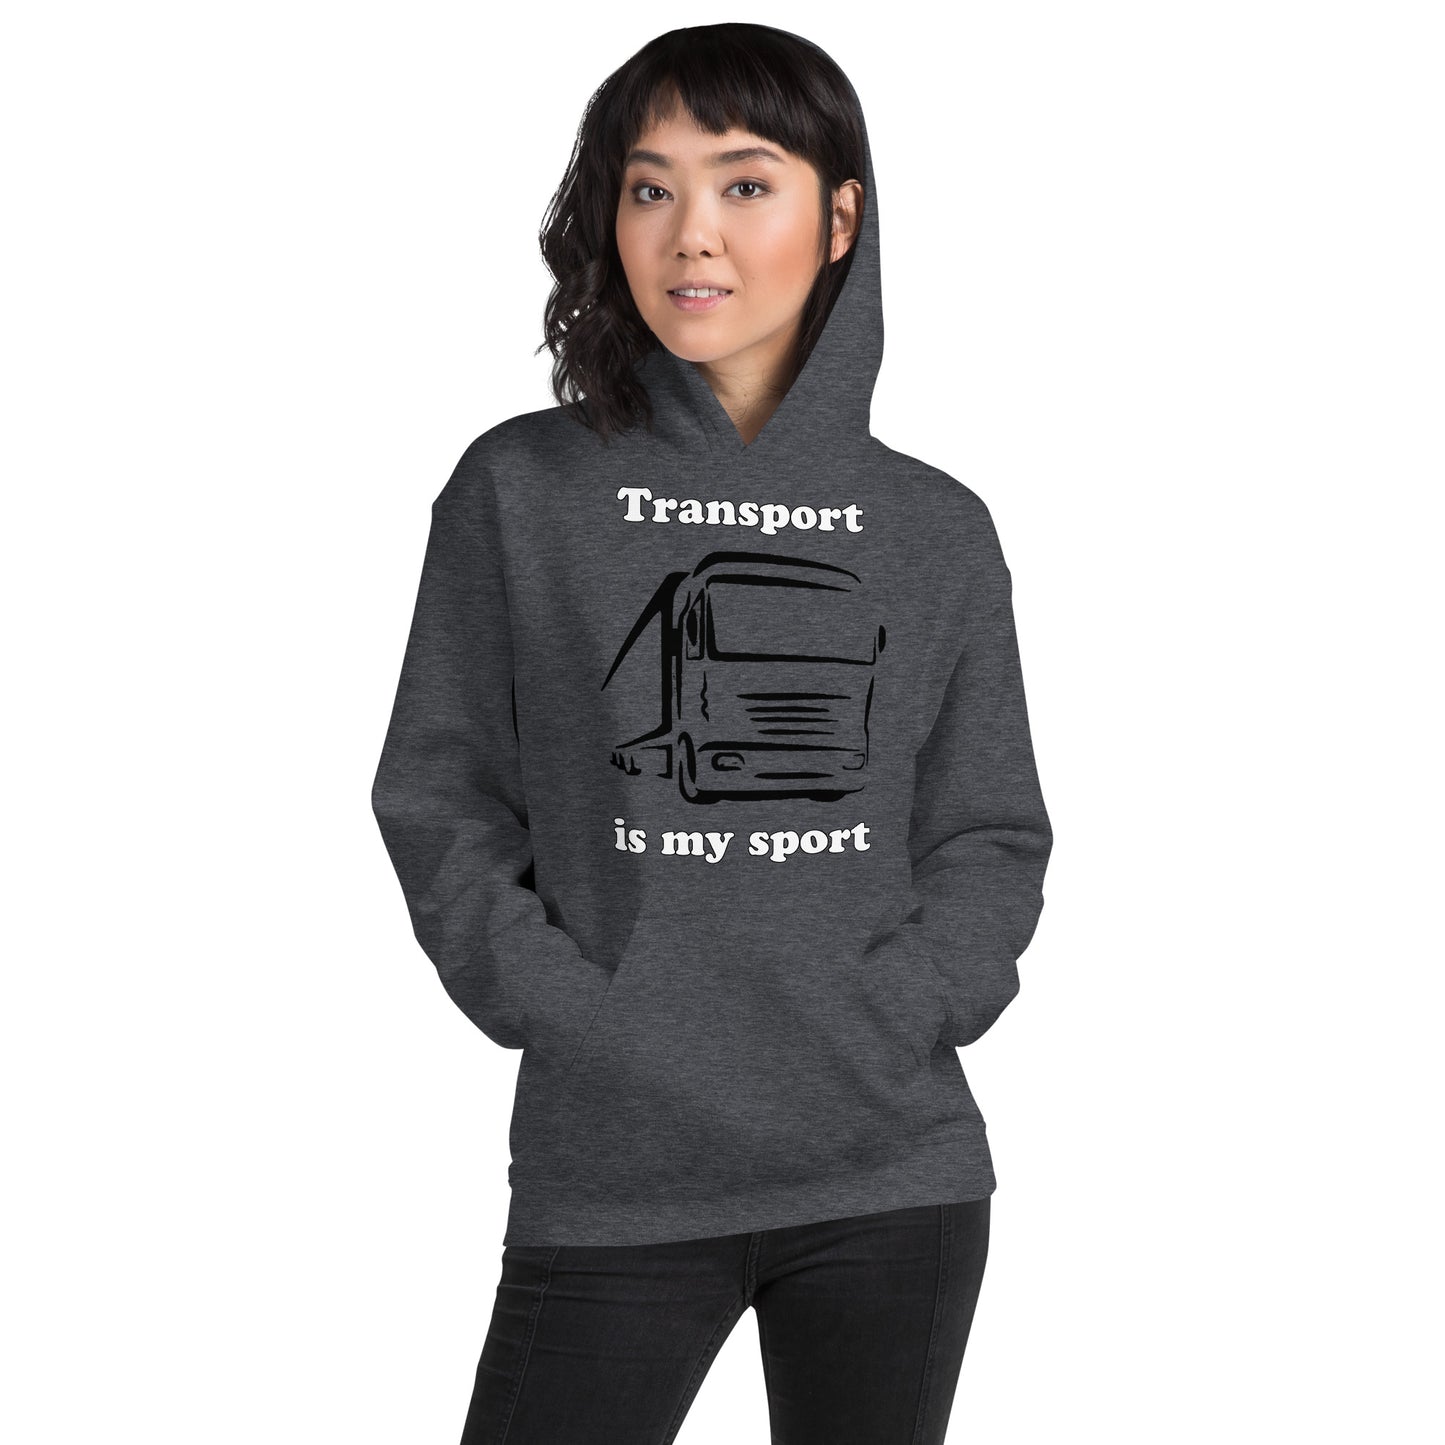 Woman with dark grey hoodie with picture of truck and text "Transport is my sport"